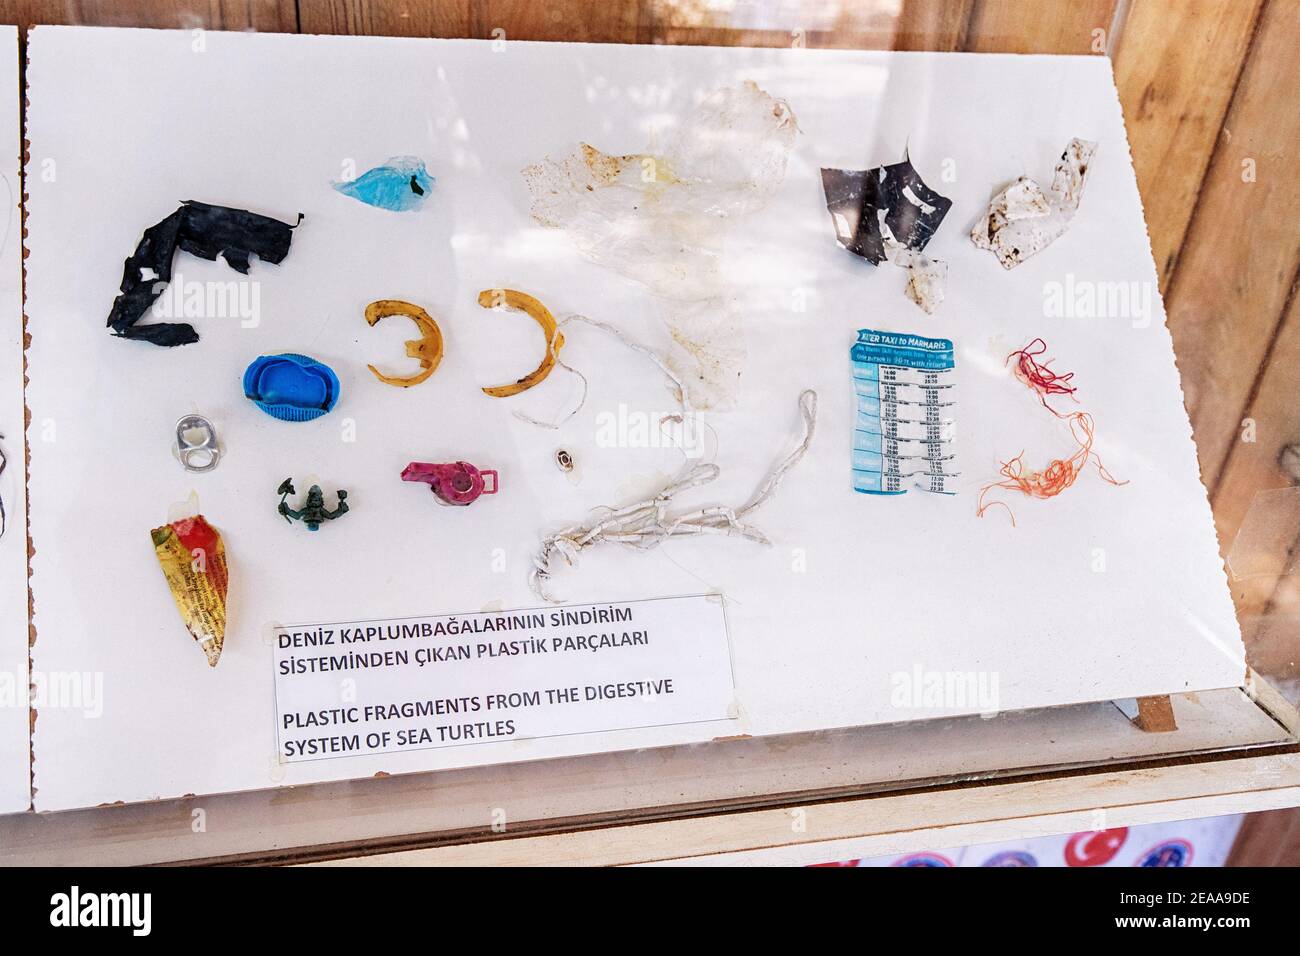 09 September 2020, Dalyan, Turkey: Fragments of plastic waste found in the digestive system of loggerhead sea turtles at the veterinary research and t Stock Photo